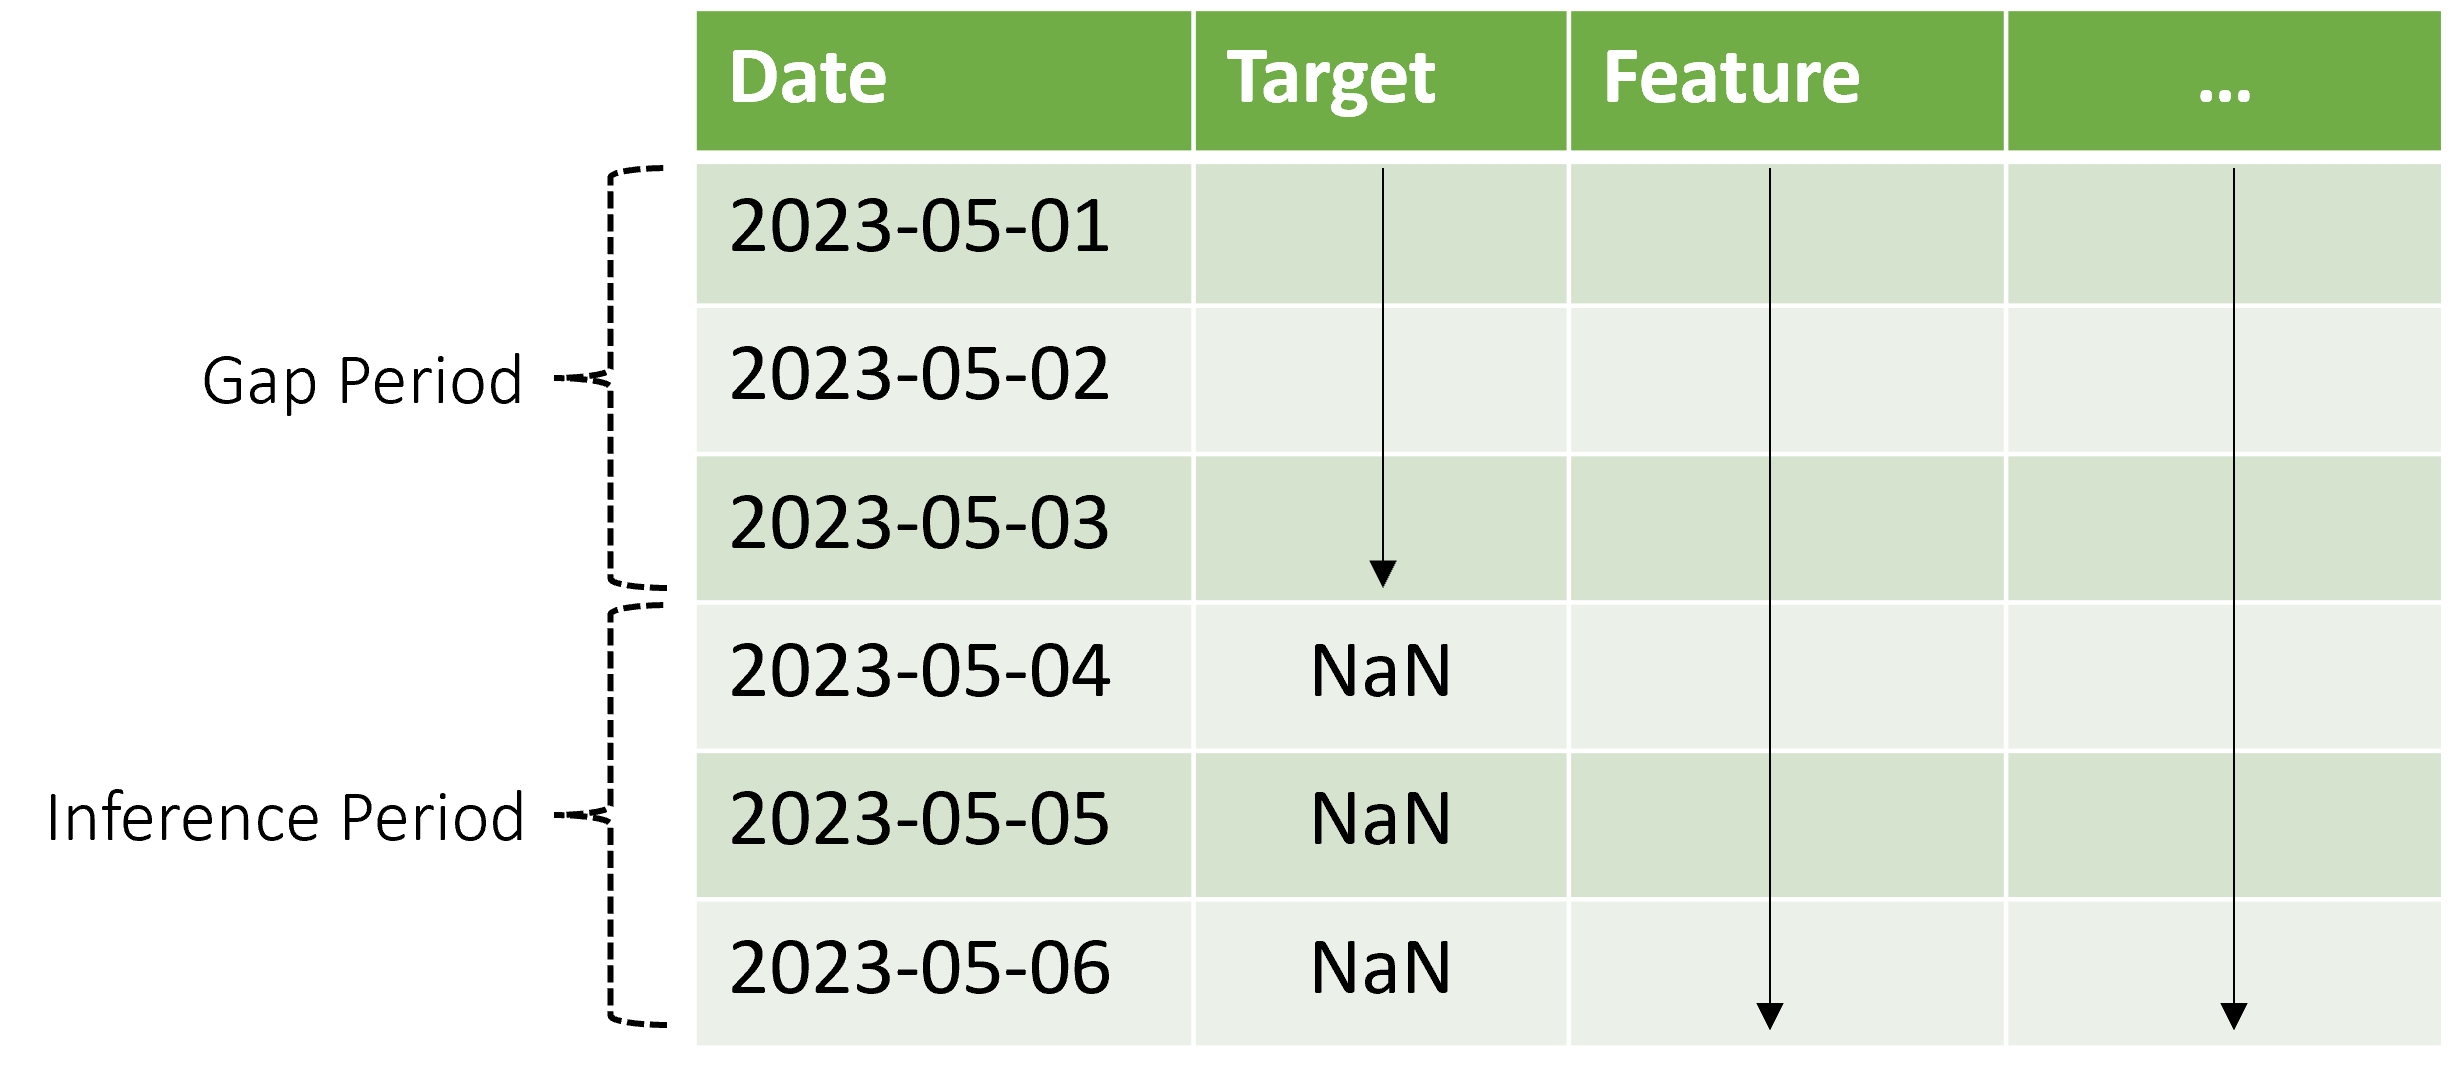 Table showing an example of prediction data when there's a gap between the training and inference periods.